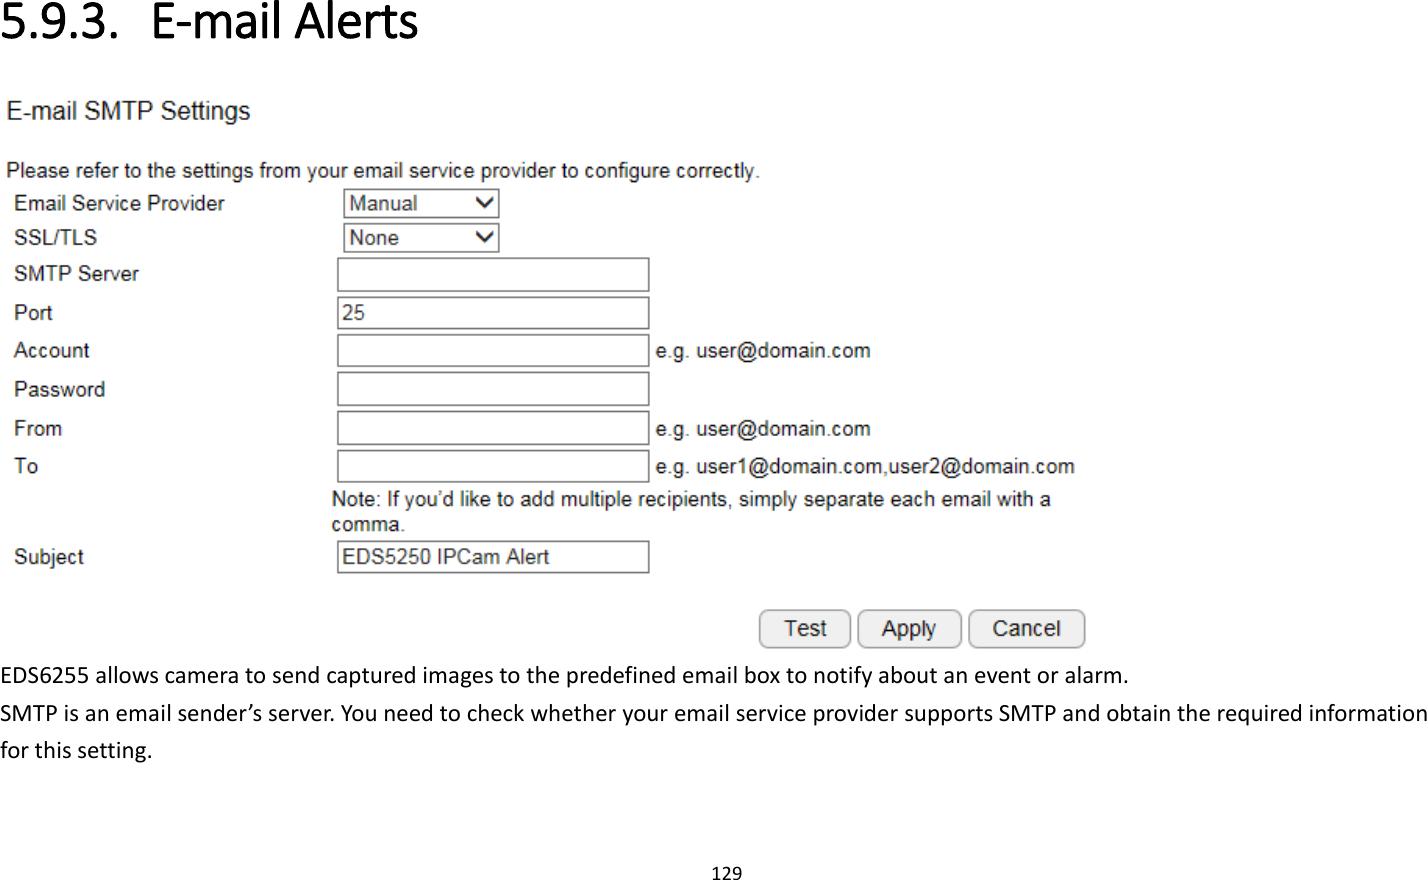 129  5.9.3. E-mail Alerts  EDS6255 allows camera to send captured images to the predefined email box to notify about an event or alarm.   SMTP is an email sender’s server. You need to check whether your email service provider supports SMTP and obtain the required information for this setting.    